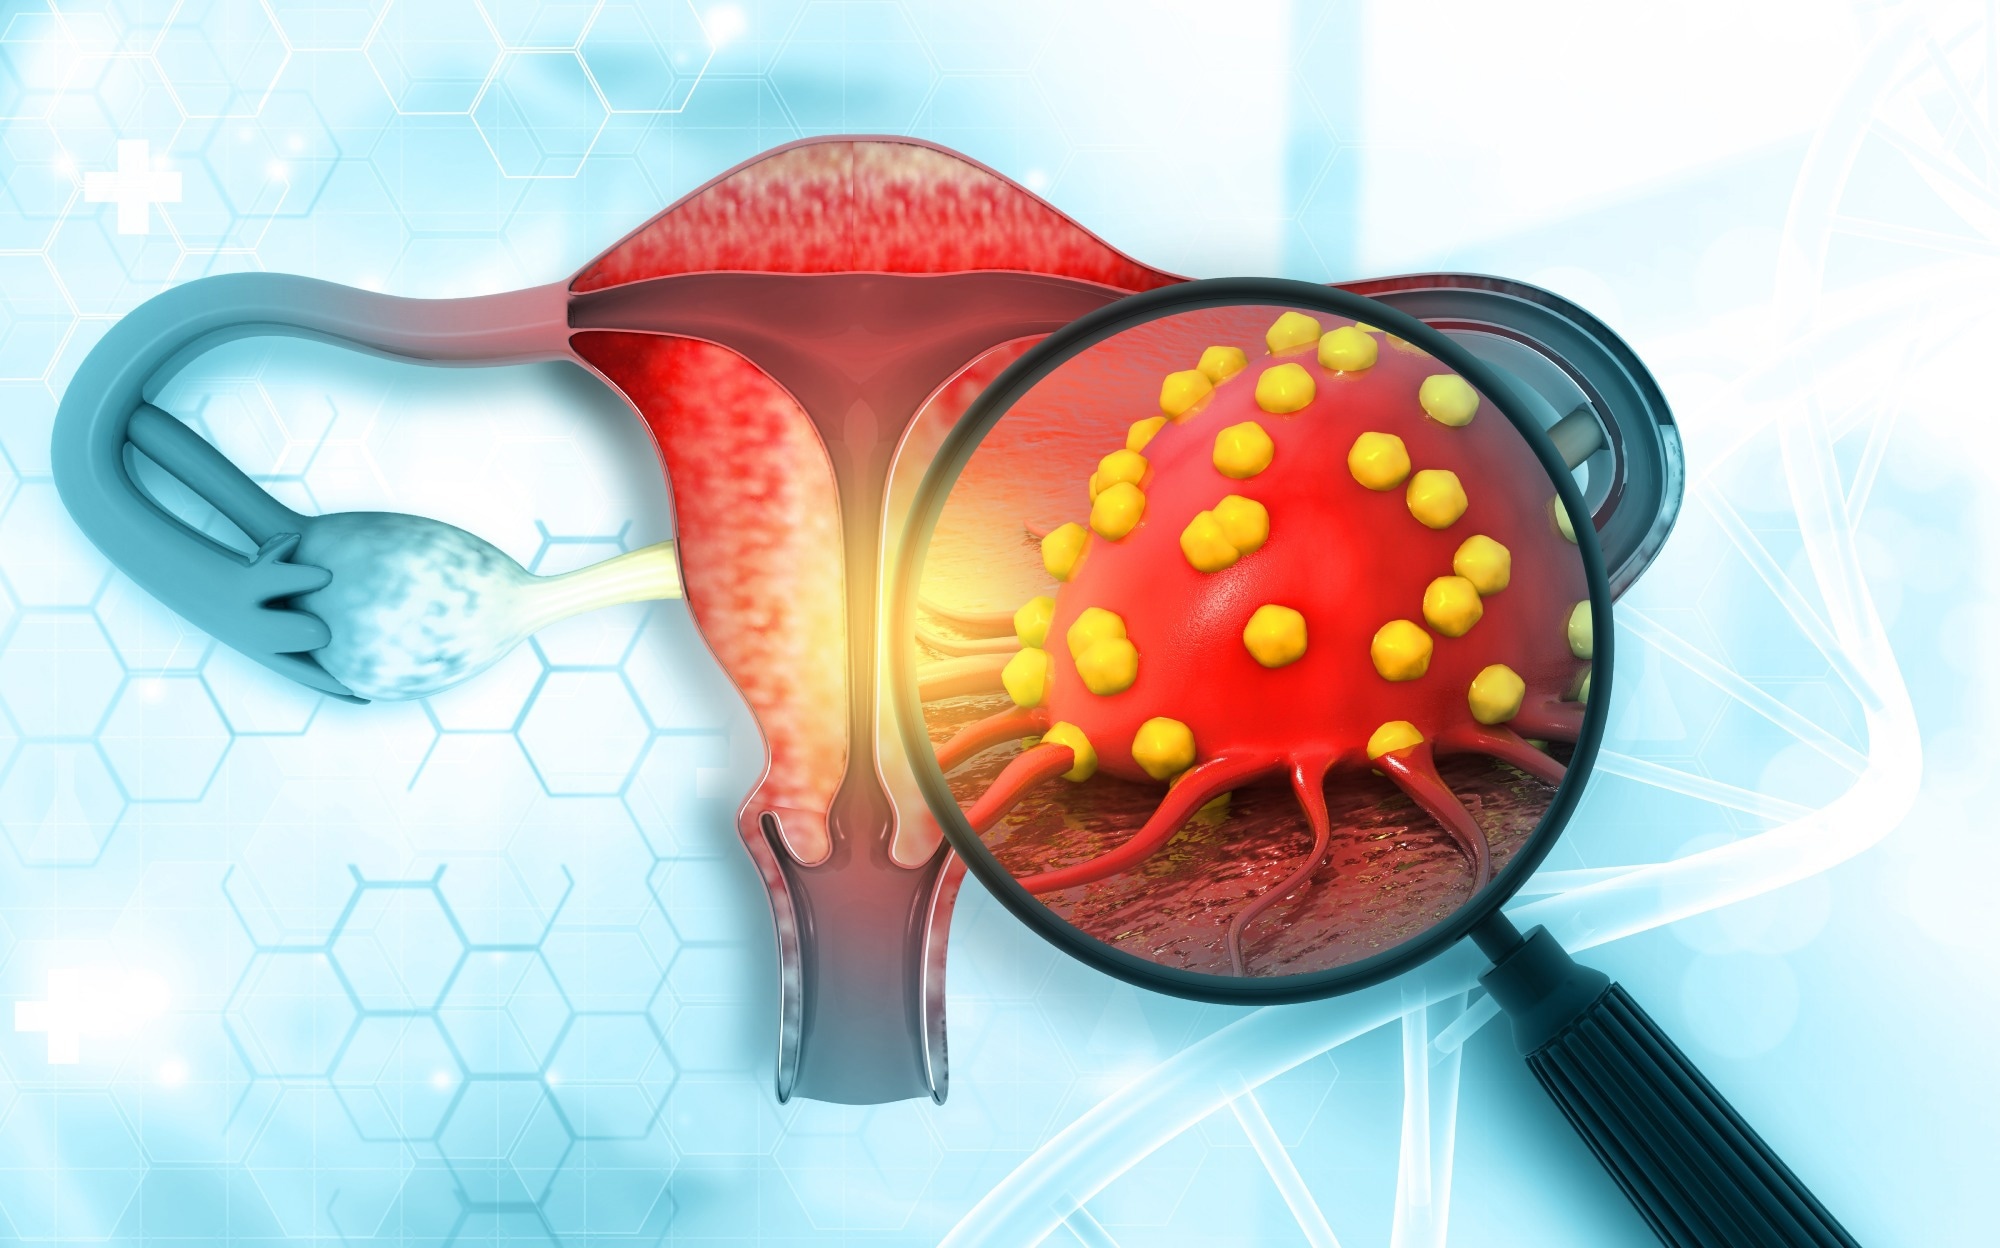 Study: Mendelian randomization analysis of factors related to ovulation and reproductive function and endometrial cancer risk. Image Credit: crystal light / Shutterstock